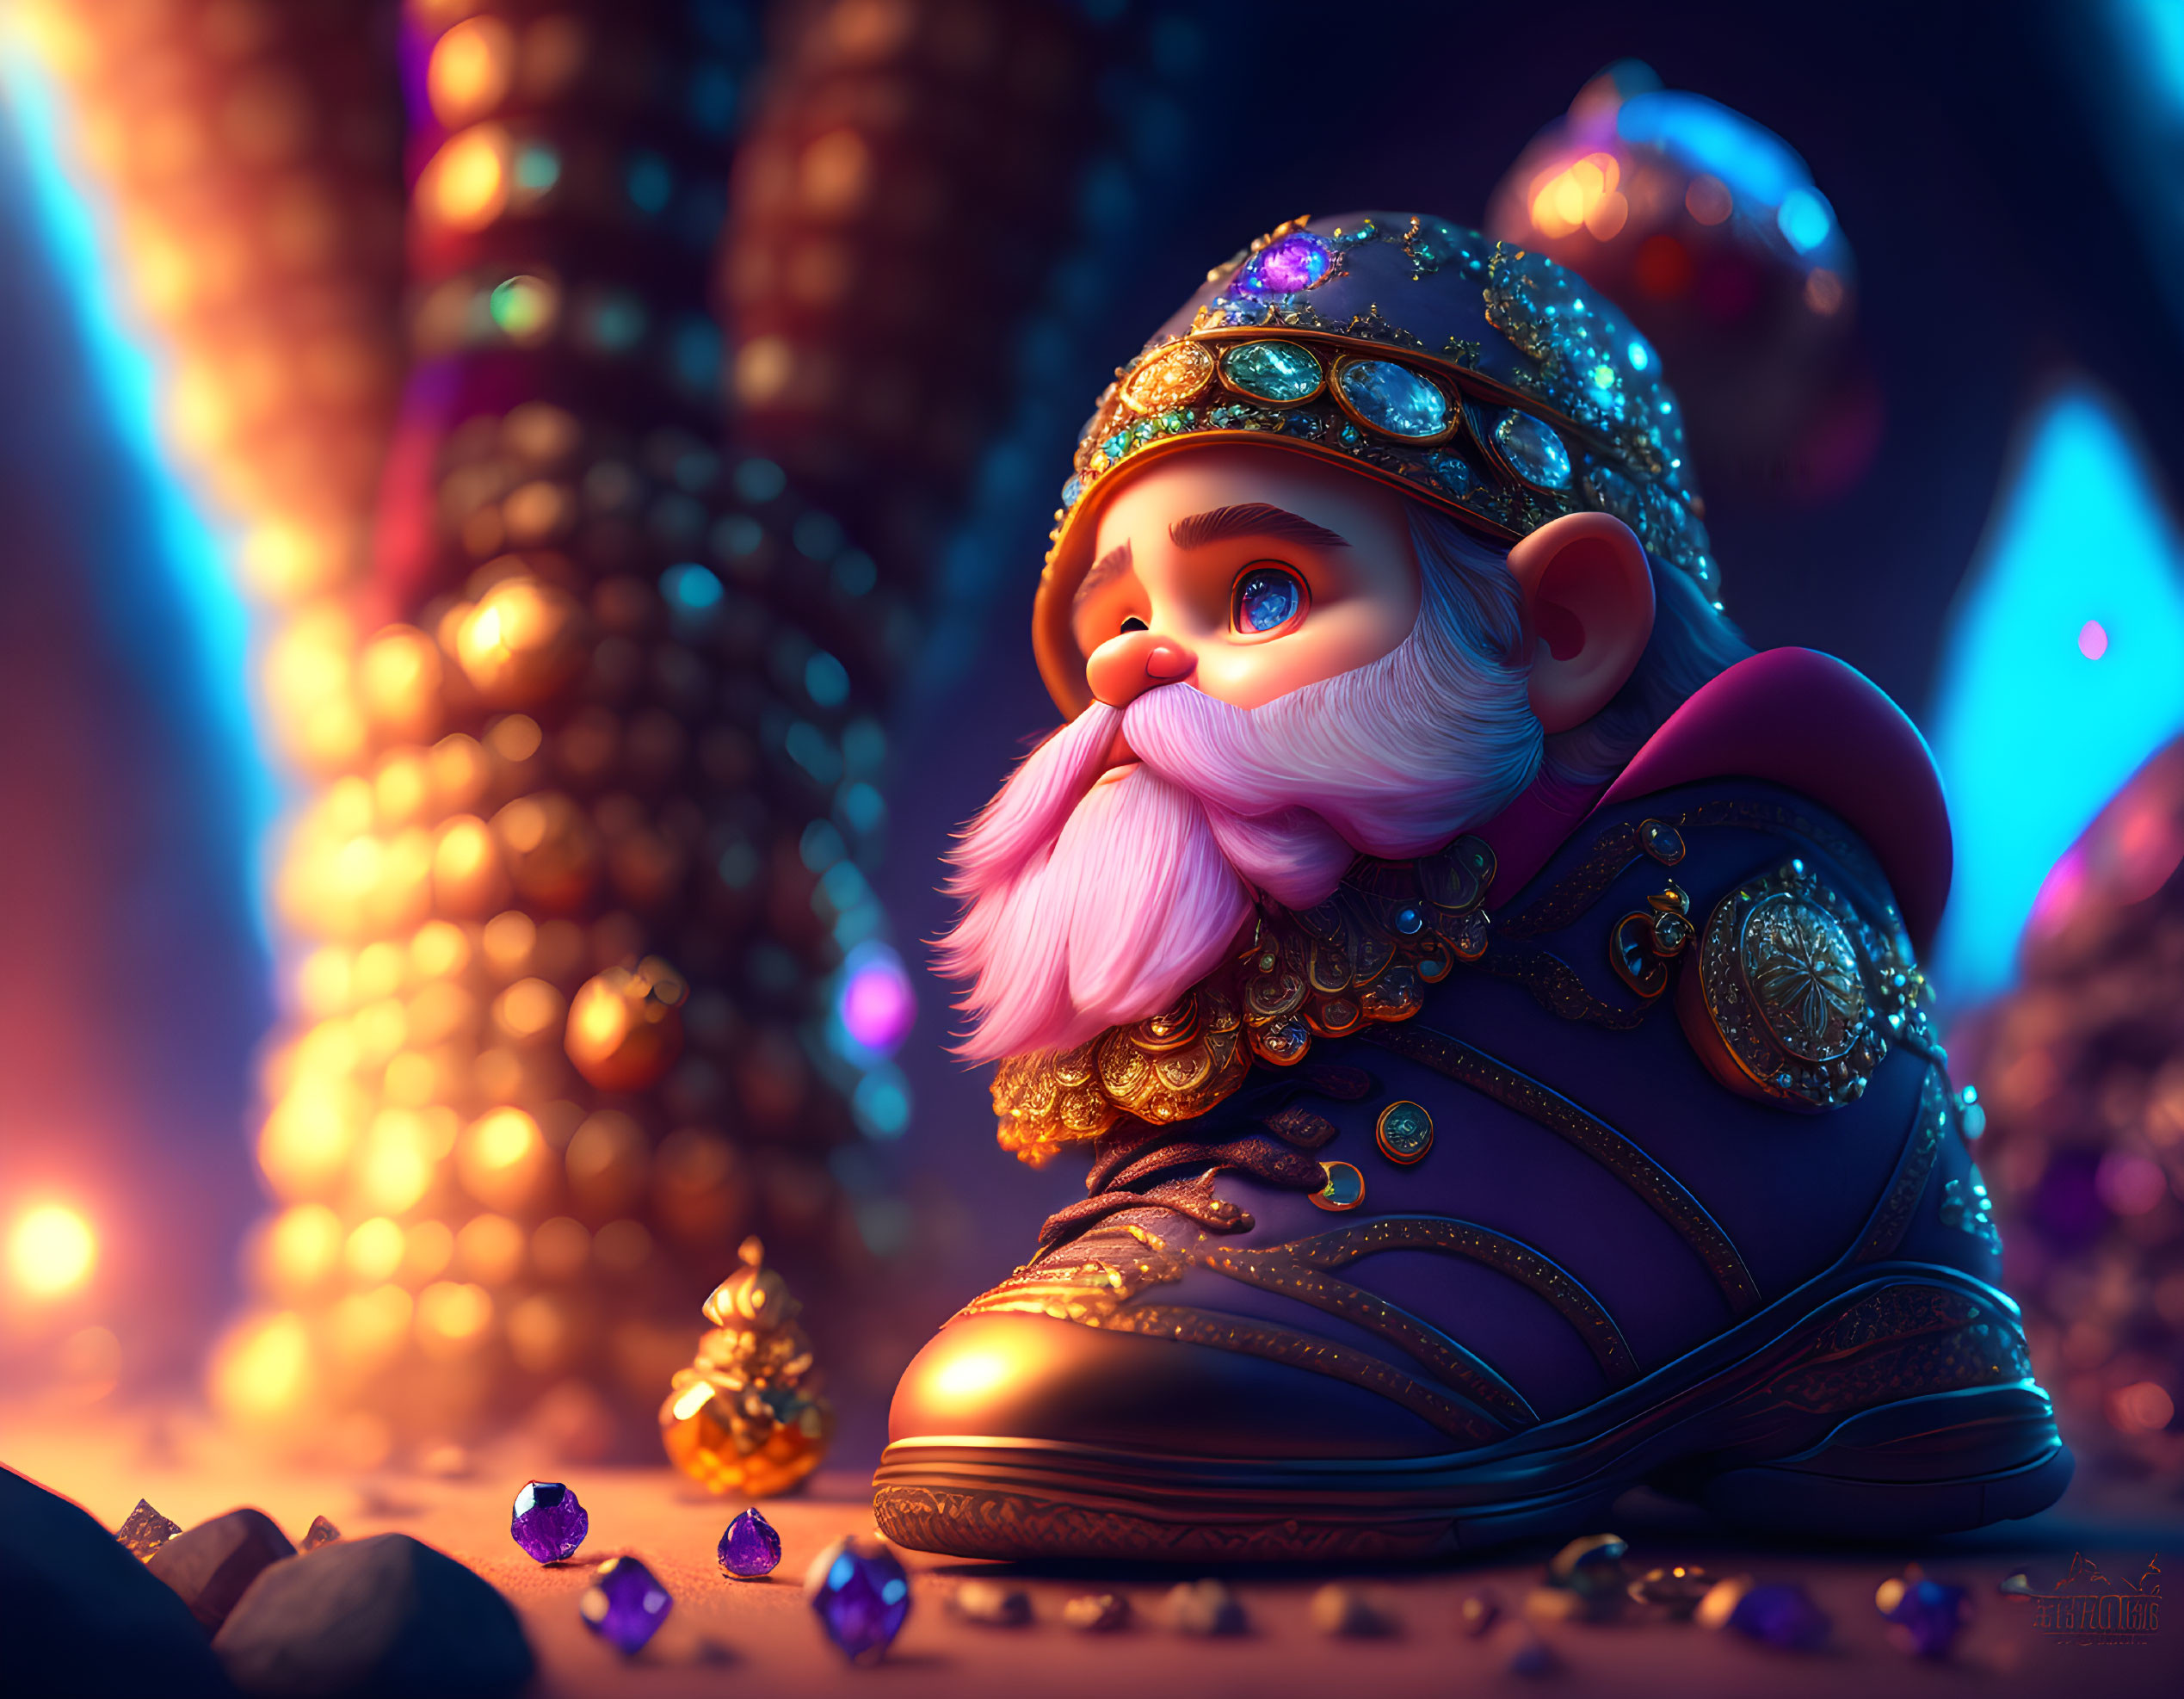 Fantasy-themed illustration of a bearded gnome in gem-studded purple attire surrounded by magical treasures.